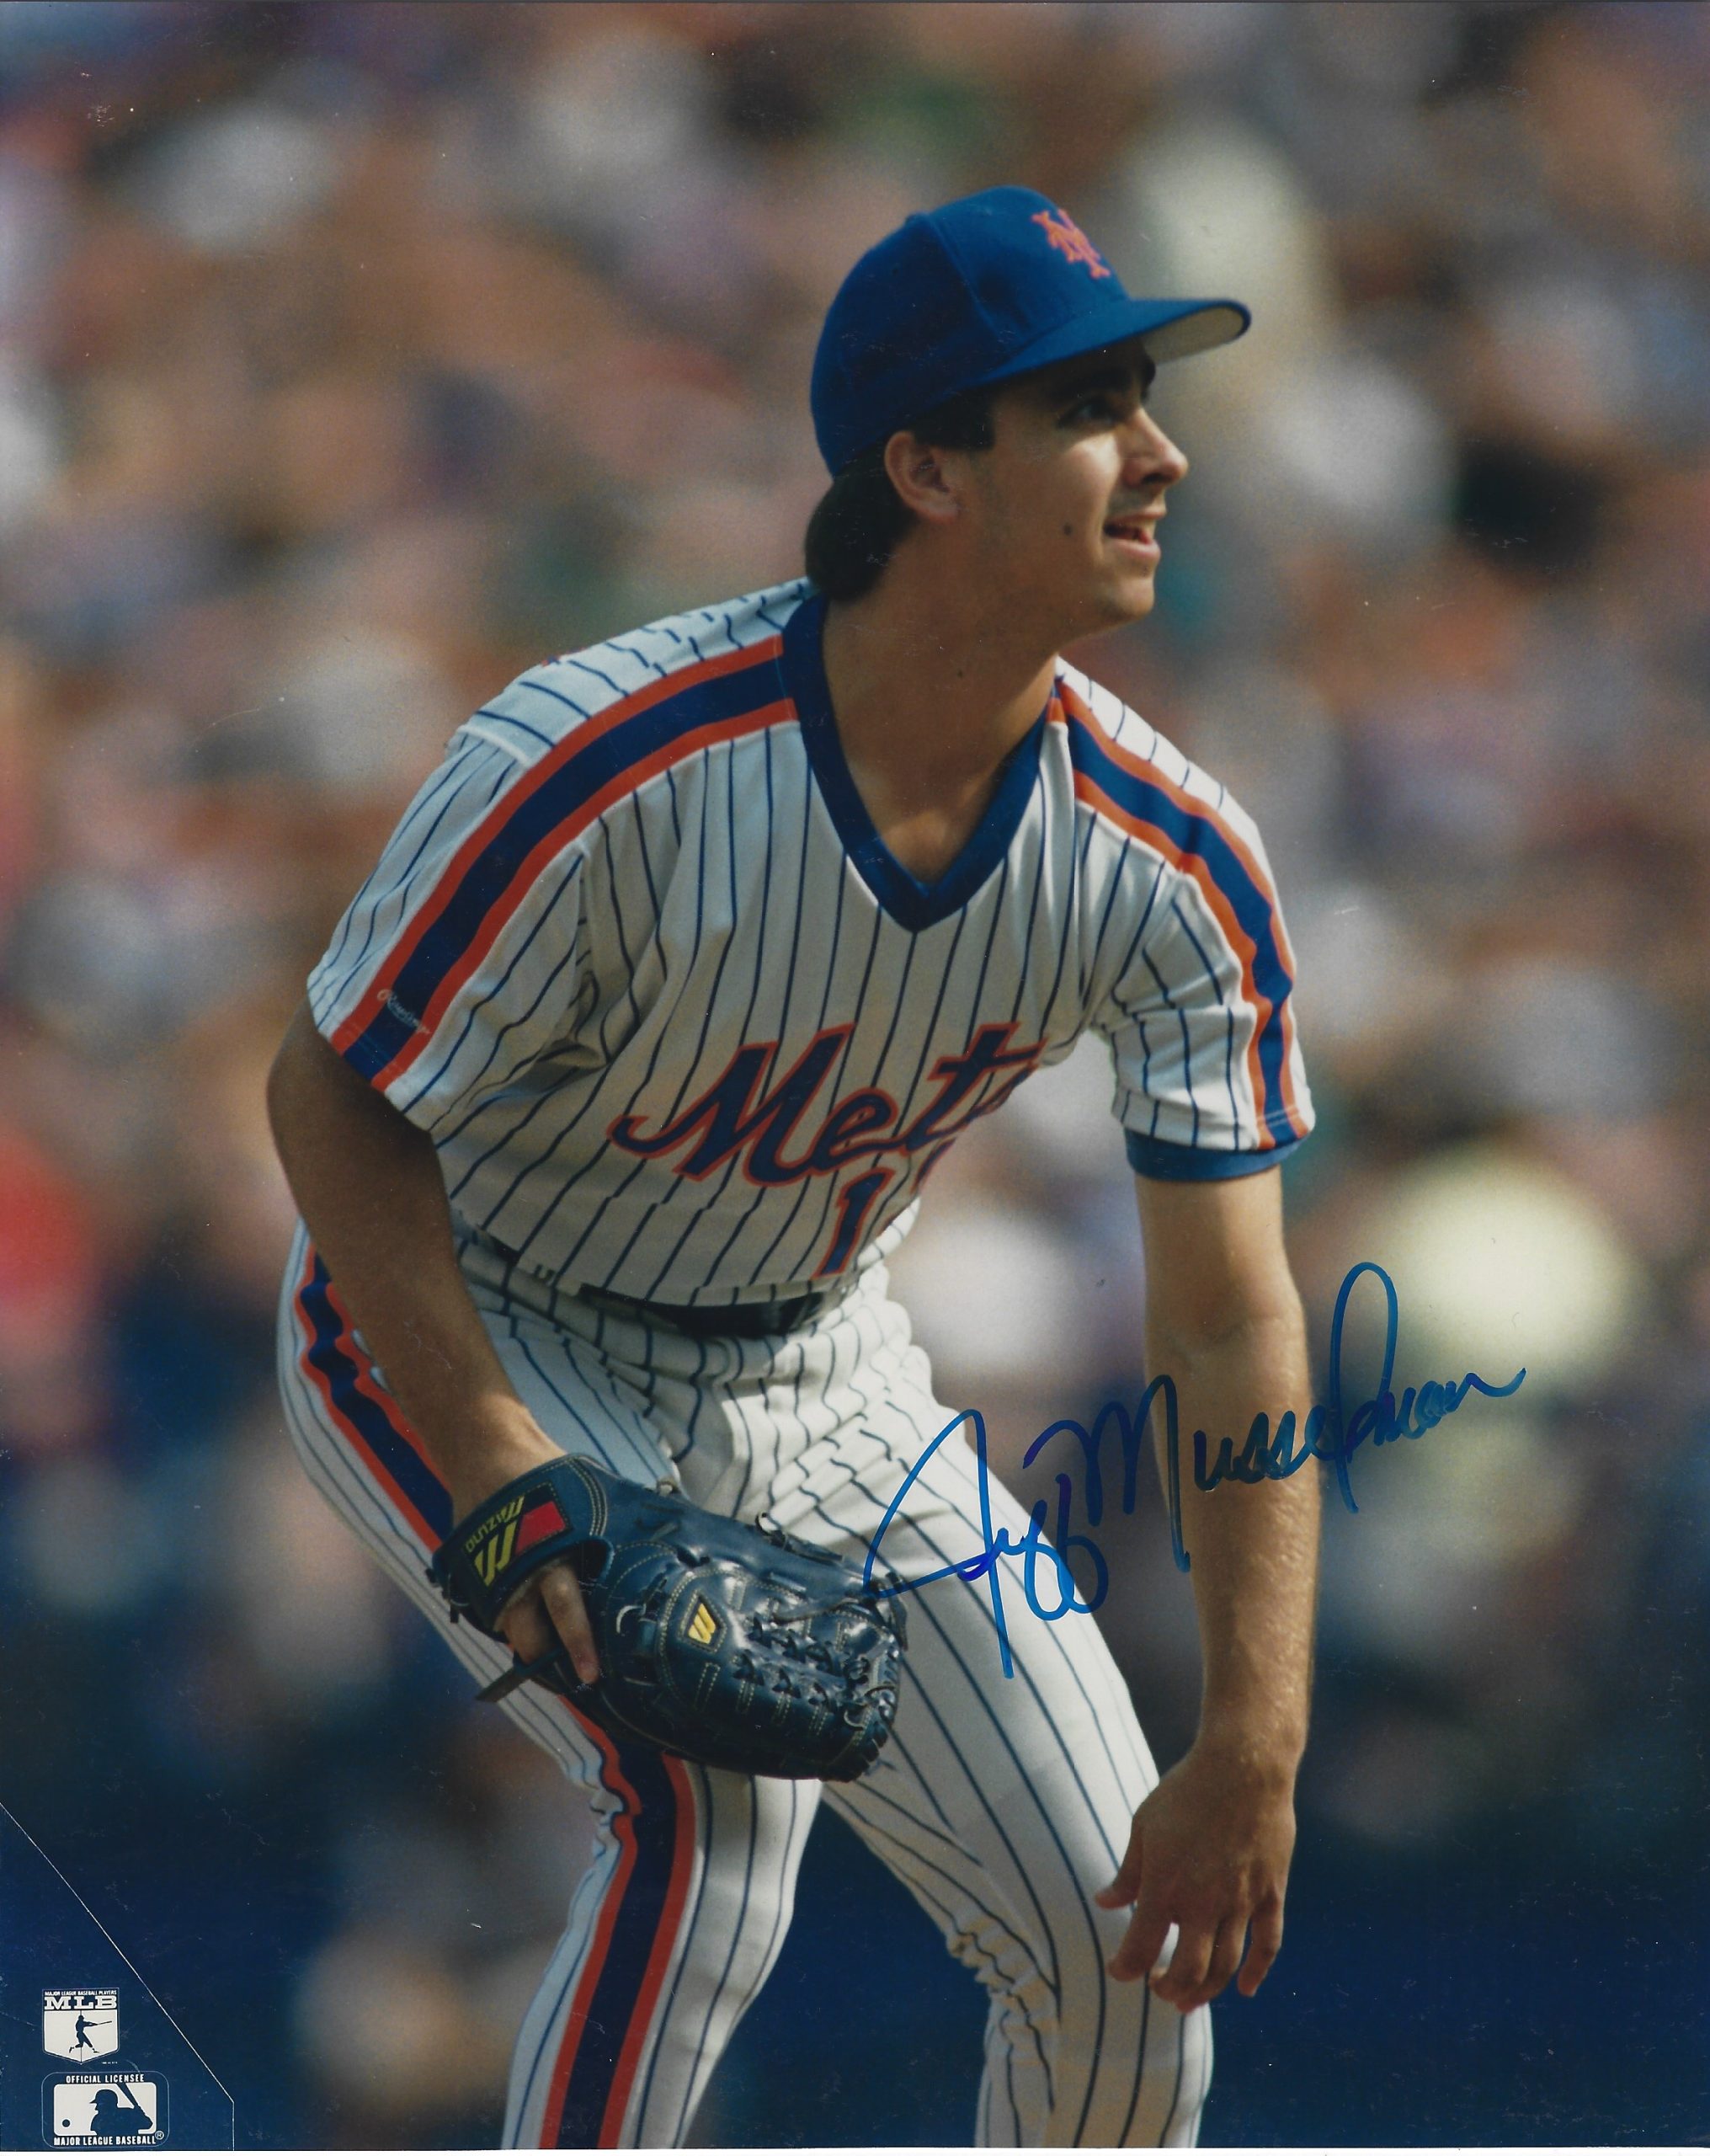 Official New York Mets Photos, Mets Autographed Pictures